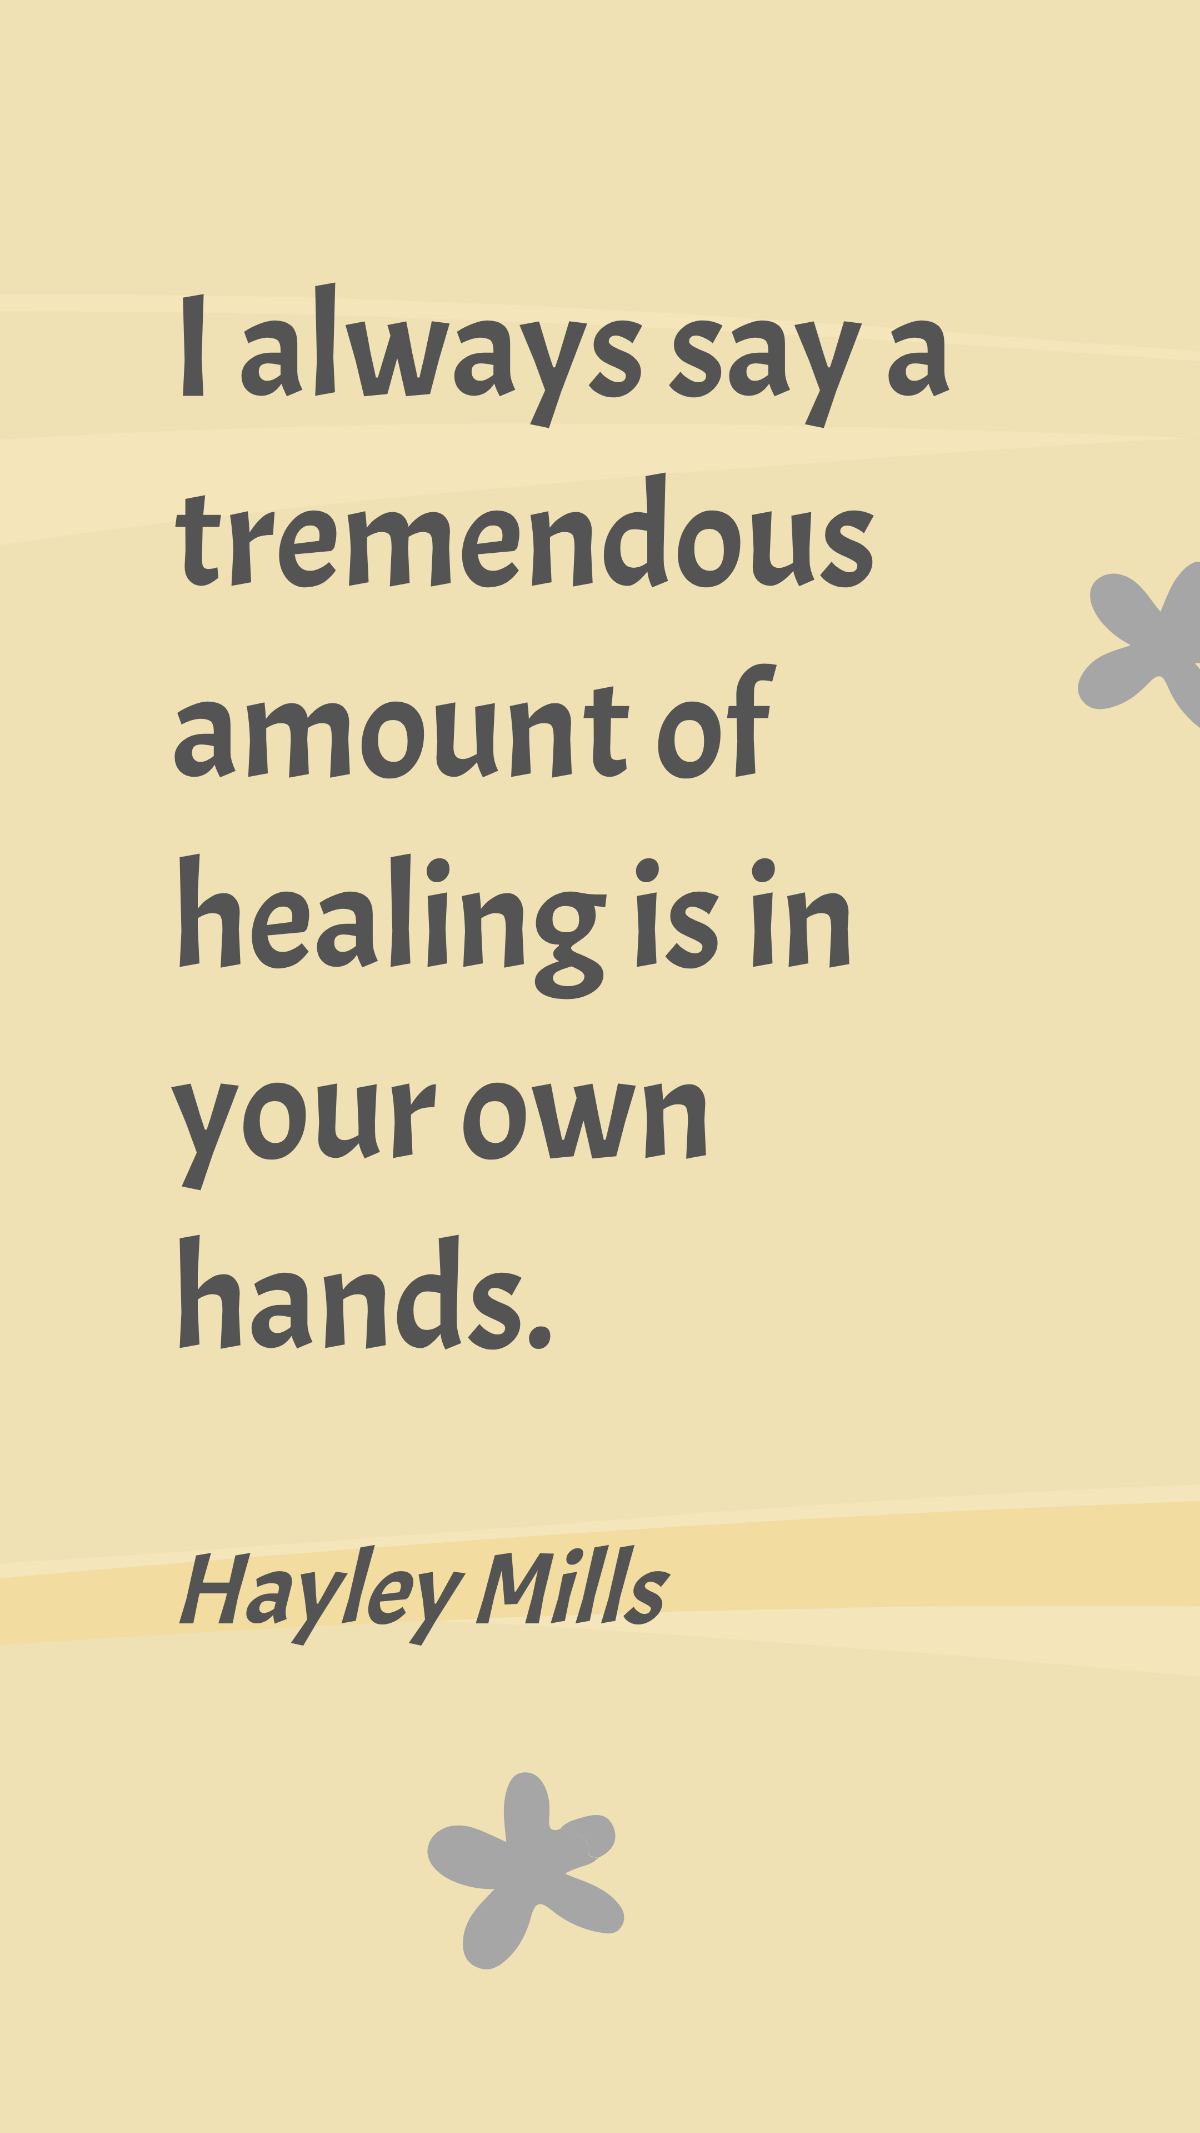 Hayley Mills - I always say a tremendous amount of healing is in your own hands. Template